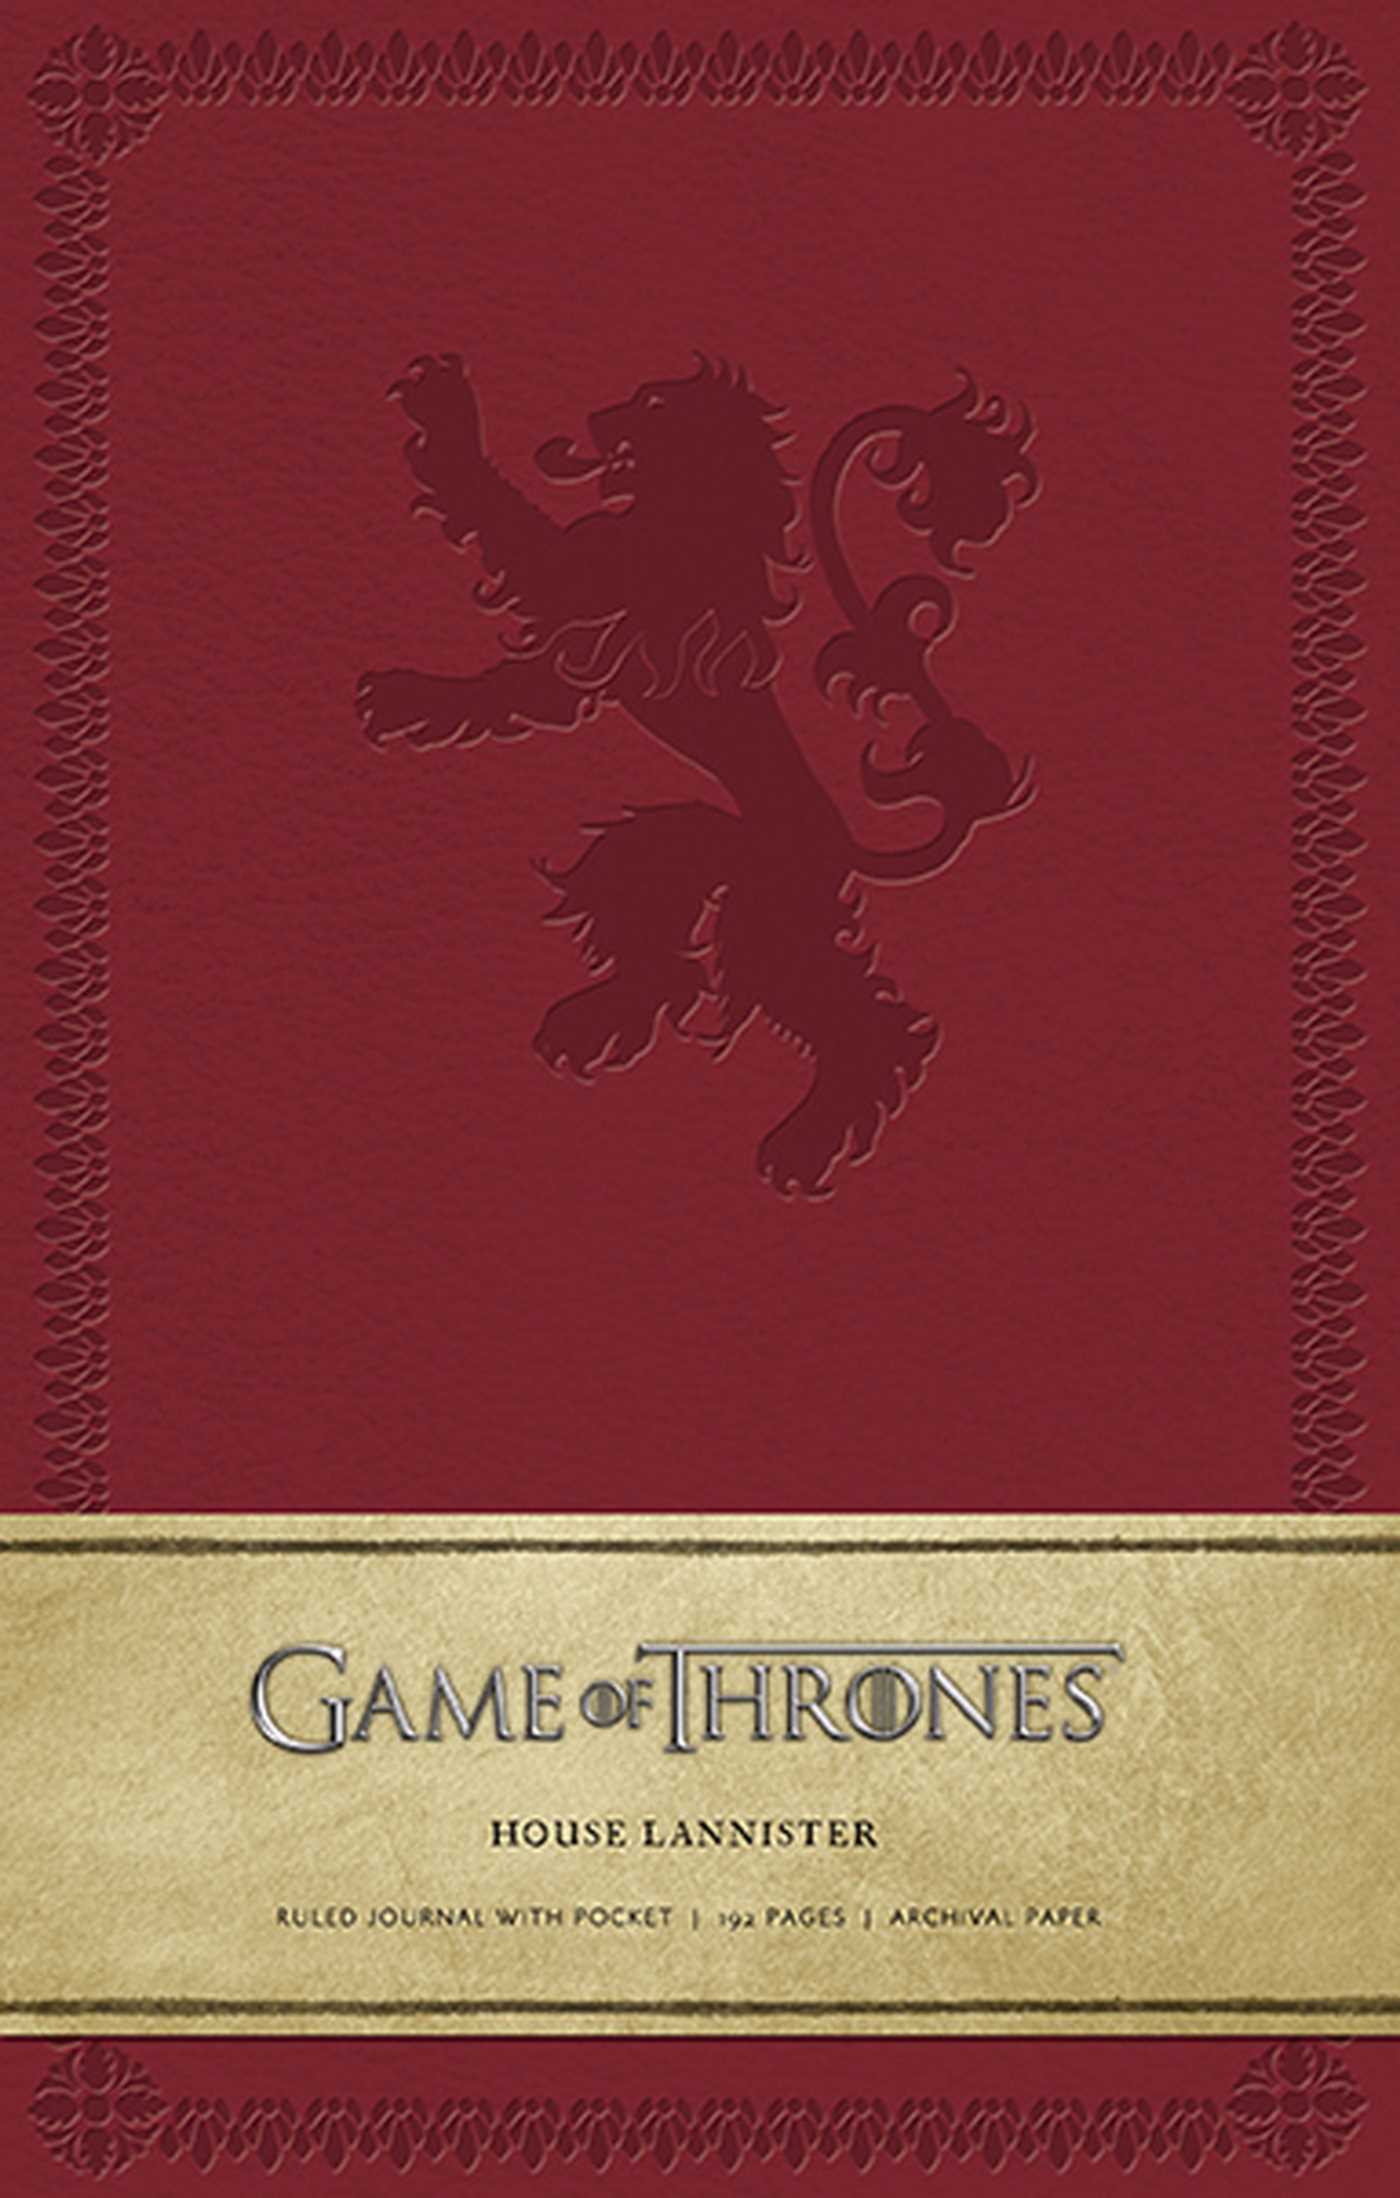 Game Of Thrones - House Lannister Journal - HD Wallpaper 